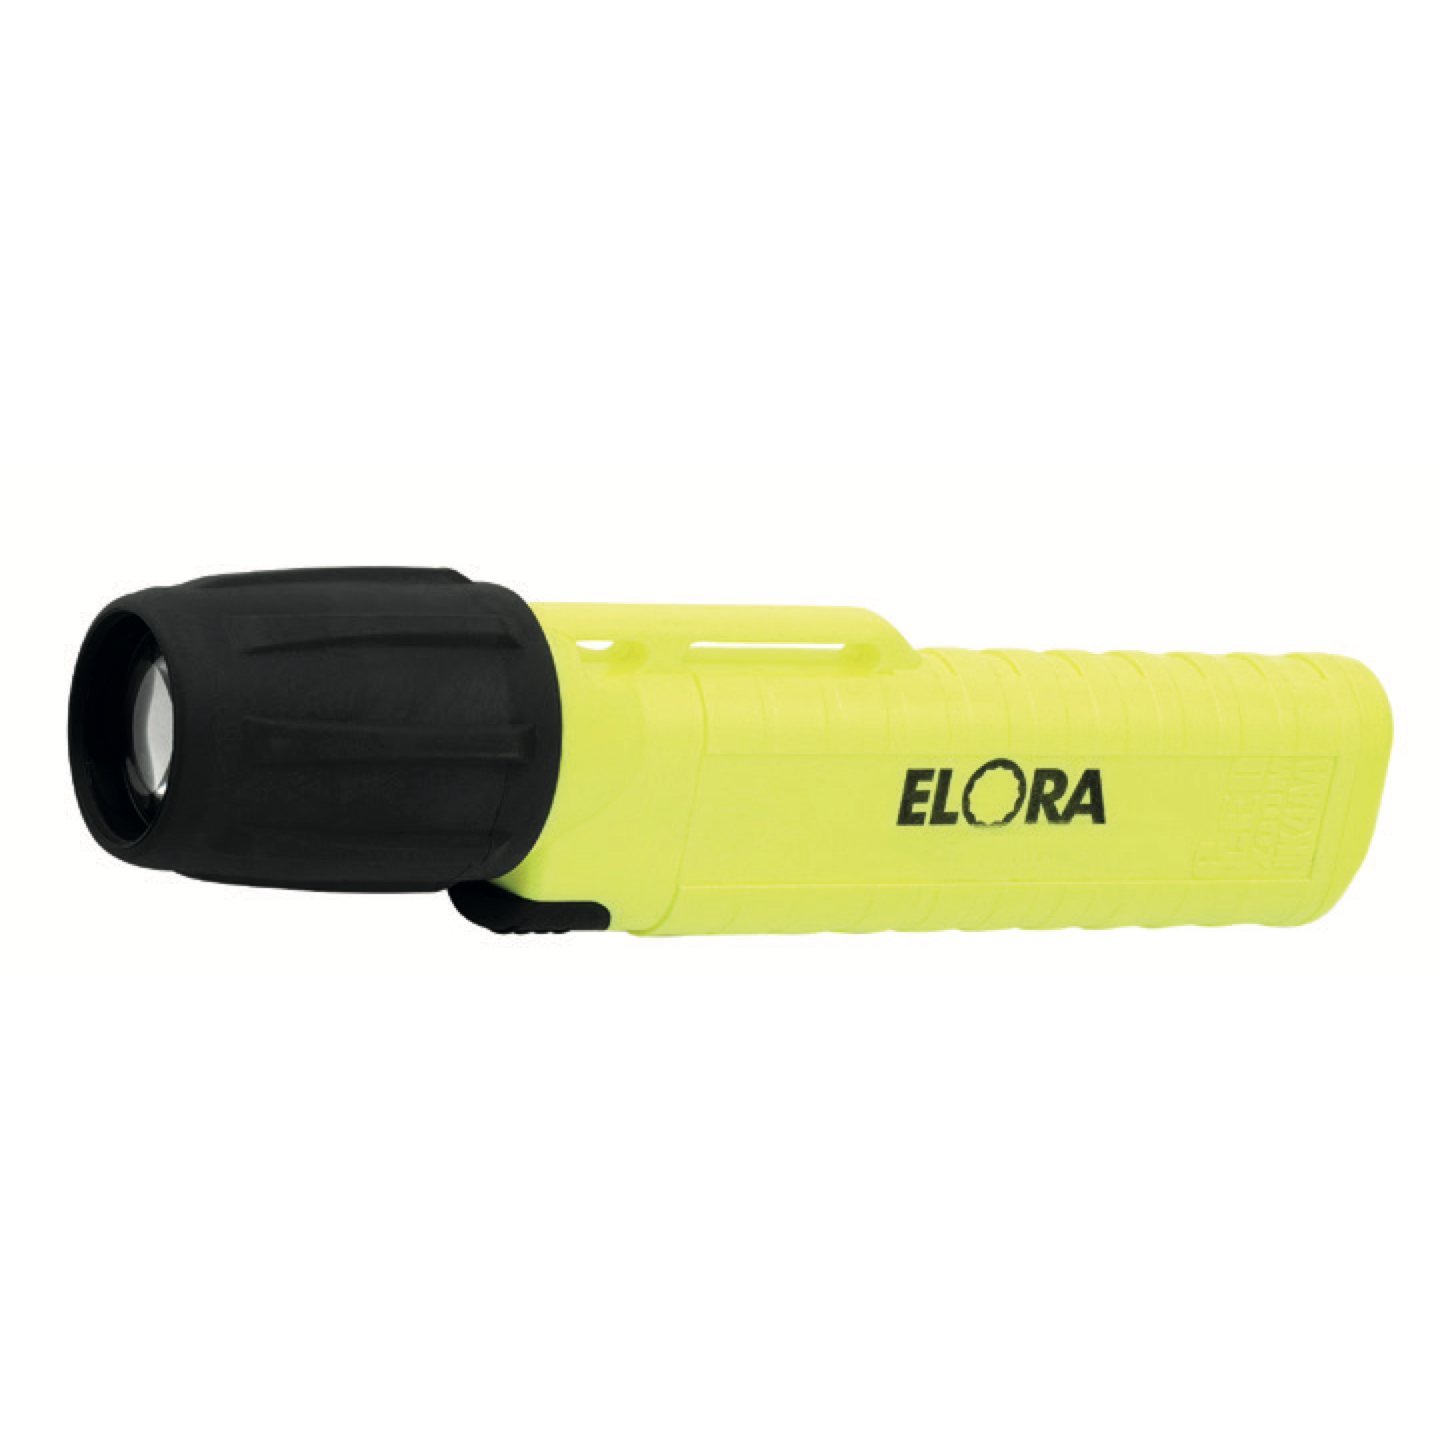 ELORA 336-EX 77 Led Lamp, Explosion-Proof (ELORA Tools) - Premium Led Lamp from ELORA - Shop now at Yew Aik.